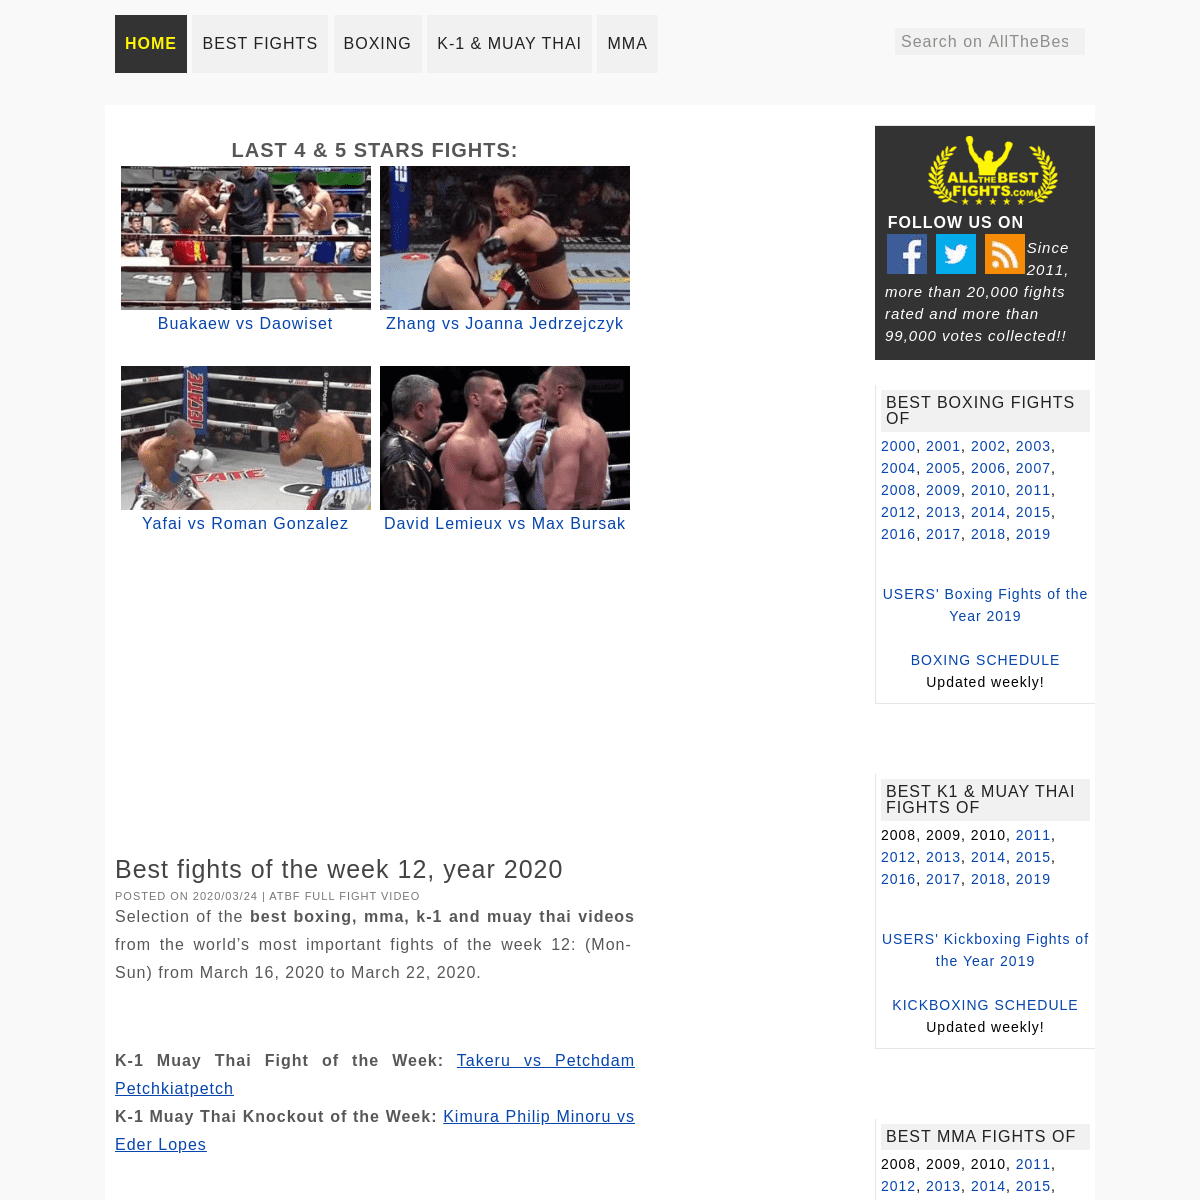 A complete backup of allthebestfights.com